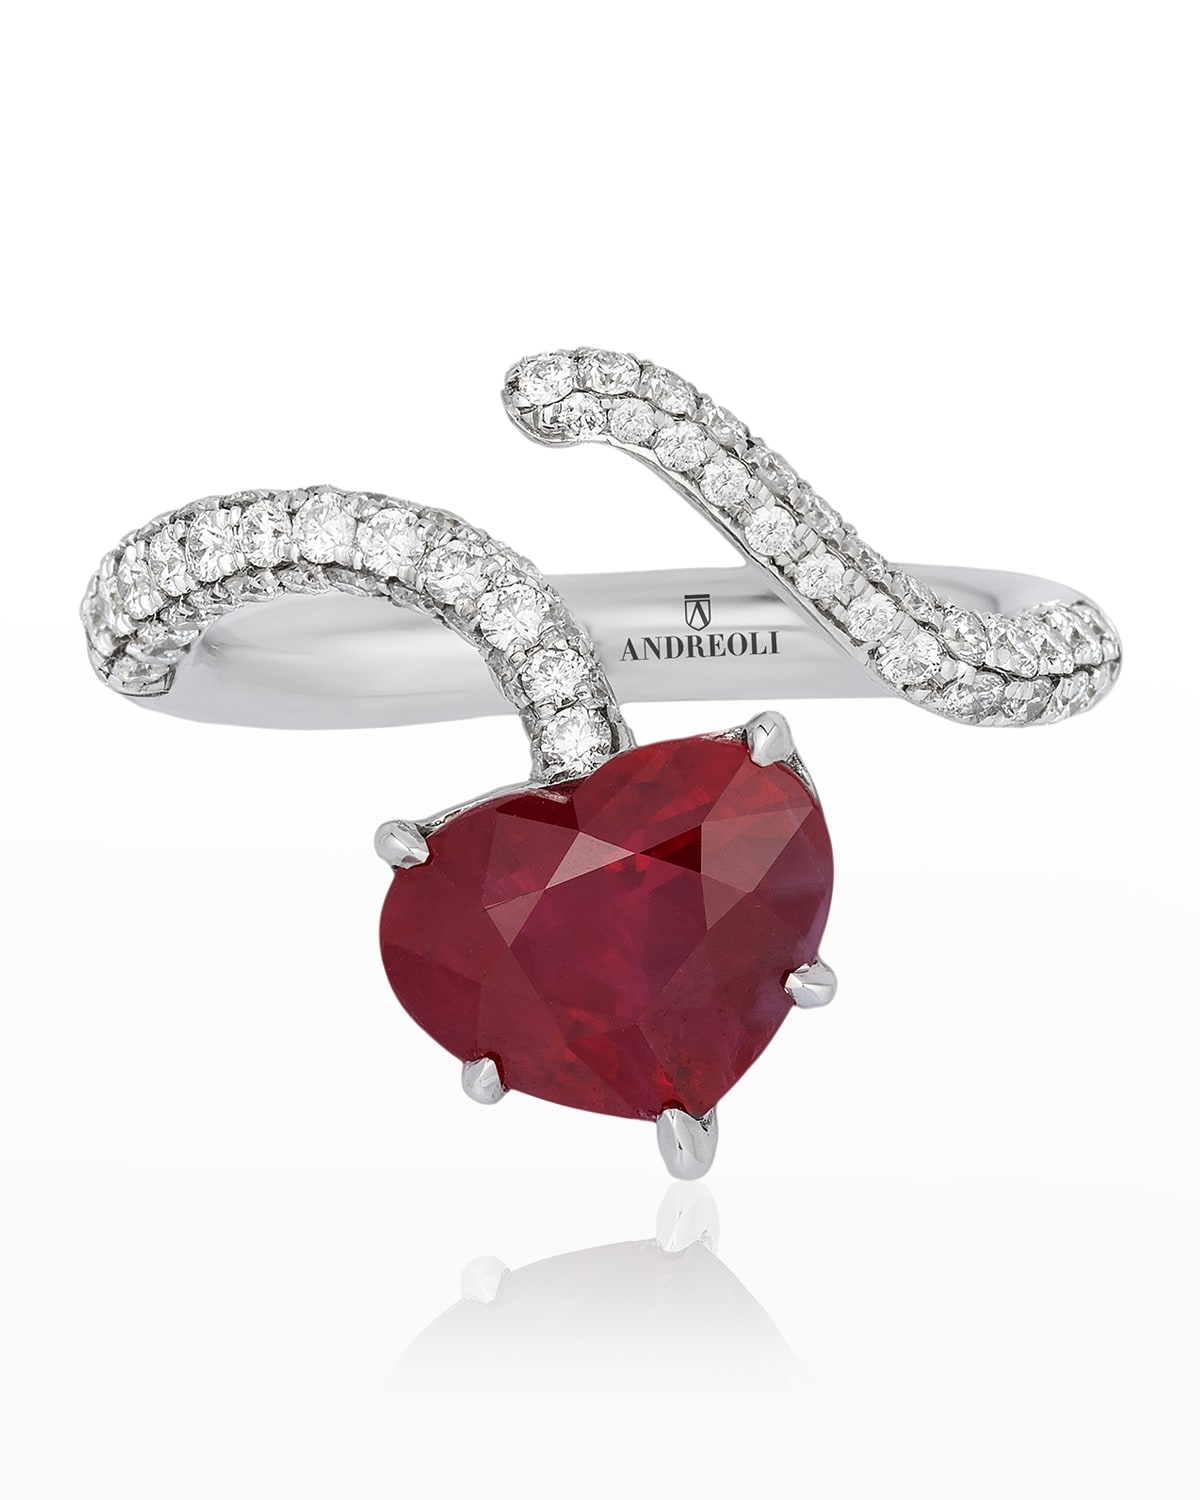 Andreoli White Gold Burma Ruby Heart Ring with Diamonds